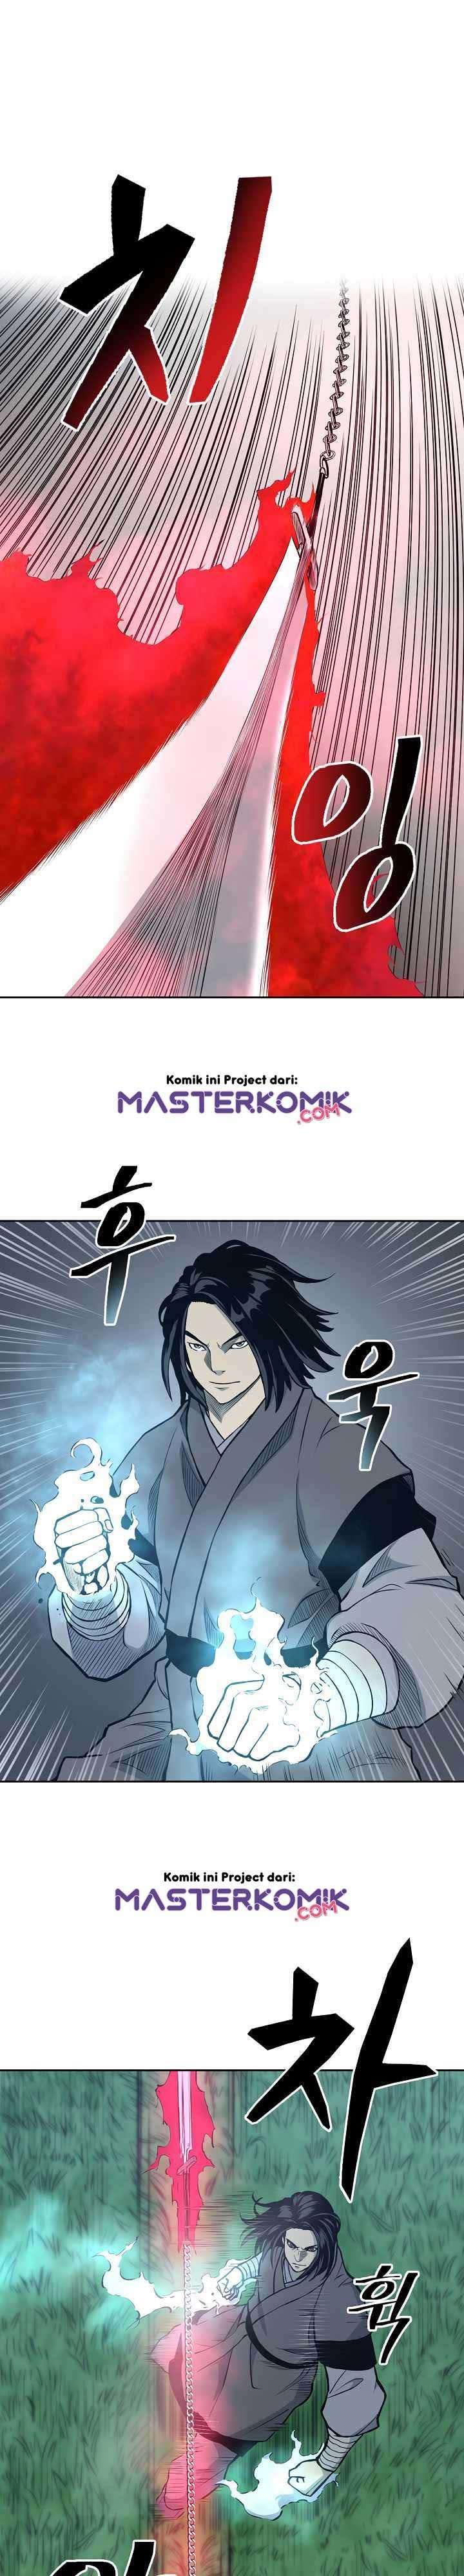 Record of the War God Chapter 82